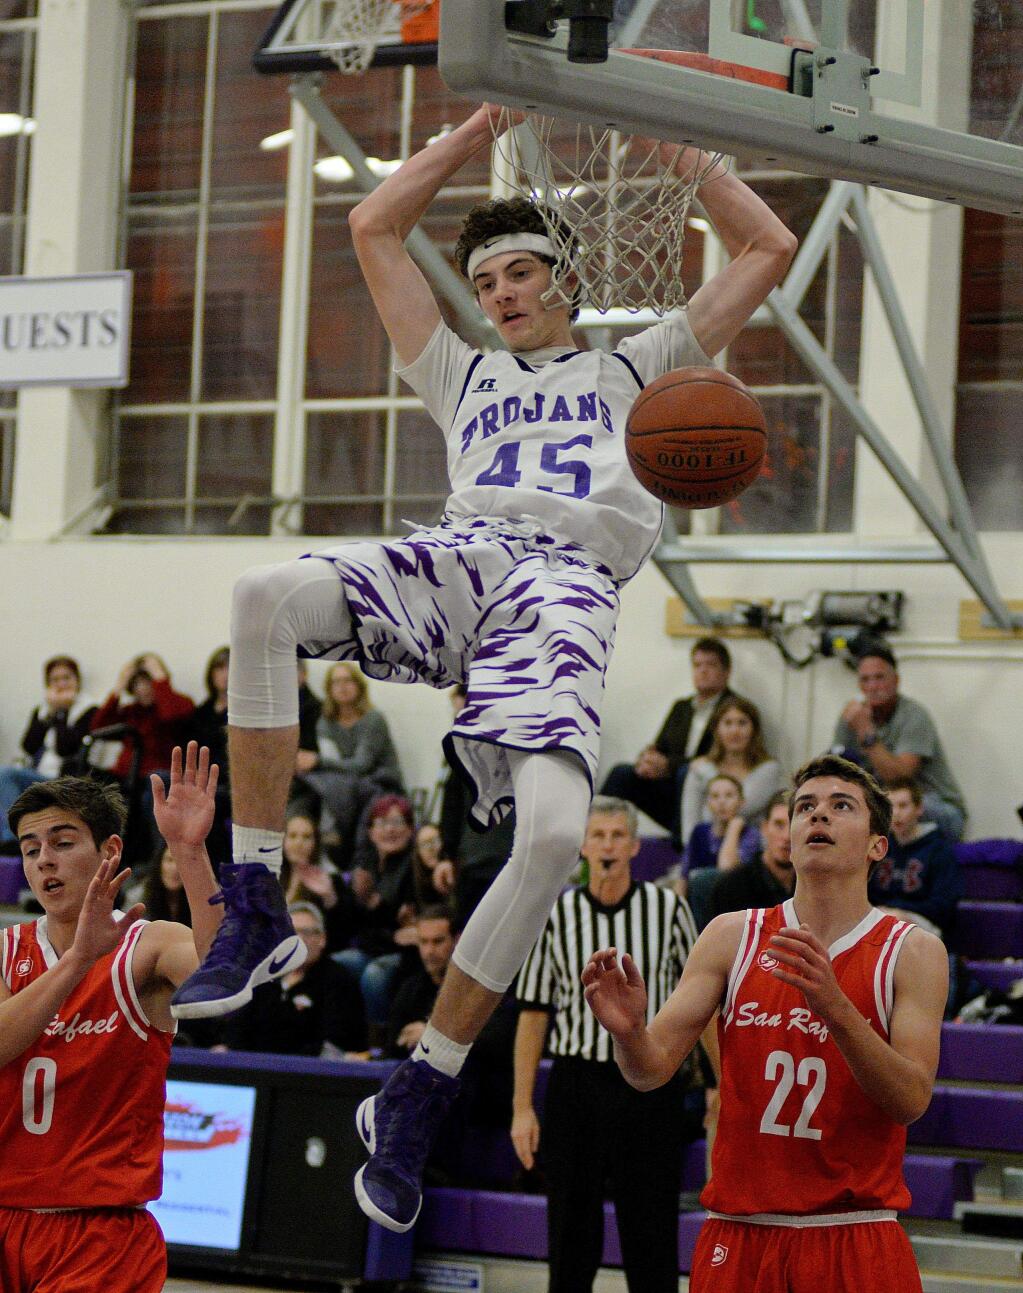 SUMNER FOWLER/FOR THE ARGUS-COURIERPetaluma's Joey Potts completes a slam against San Rafael. The senior is keeping his college options open.